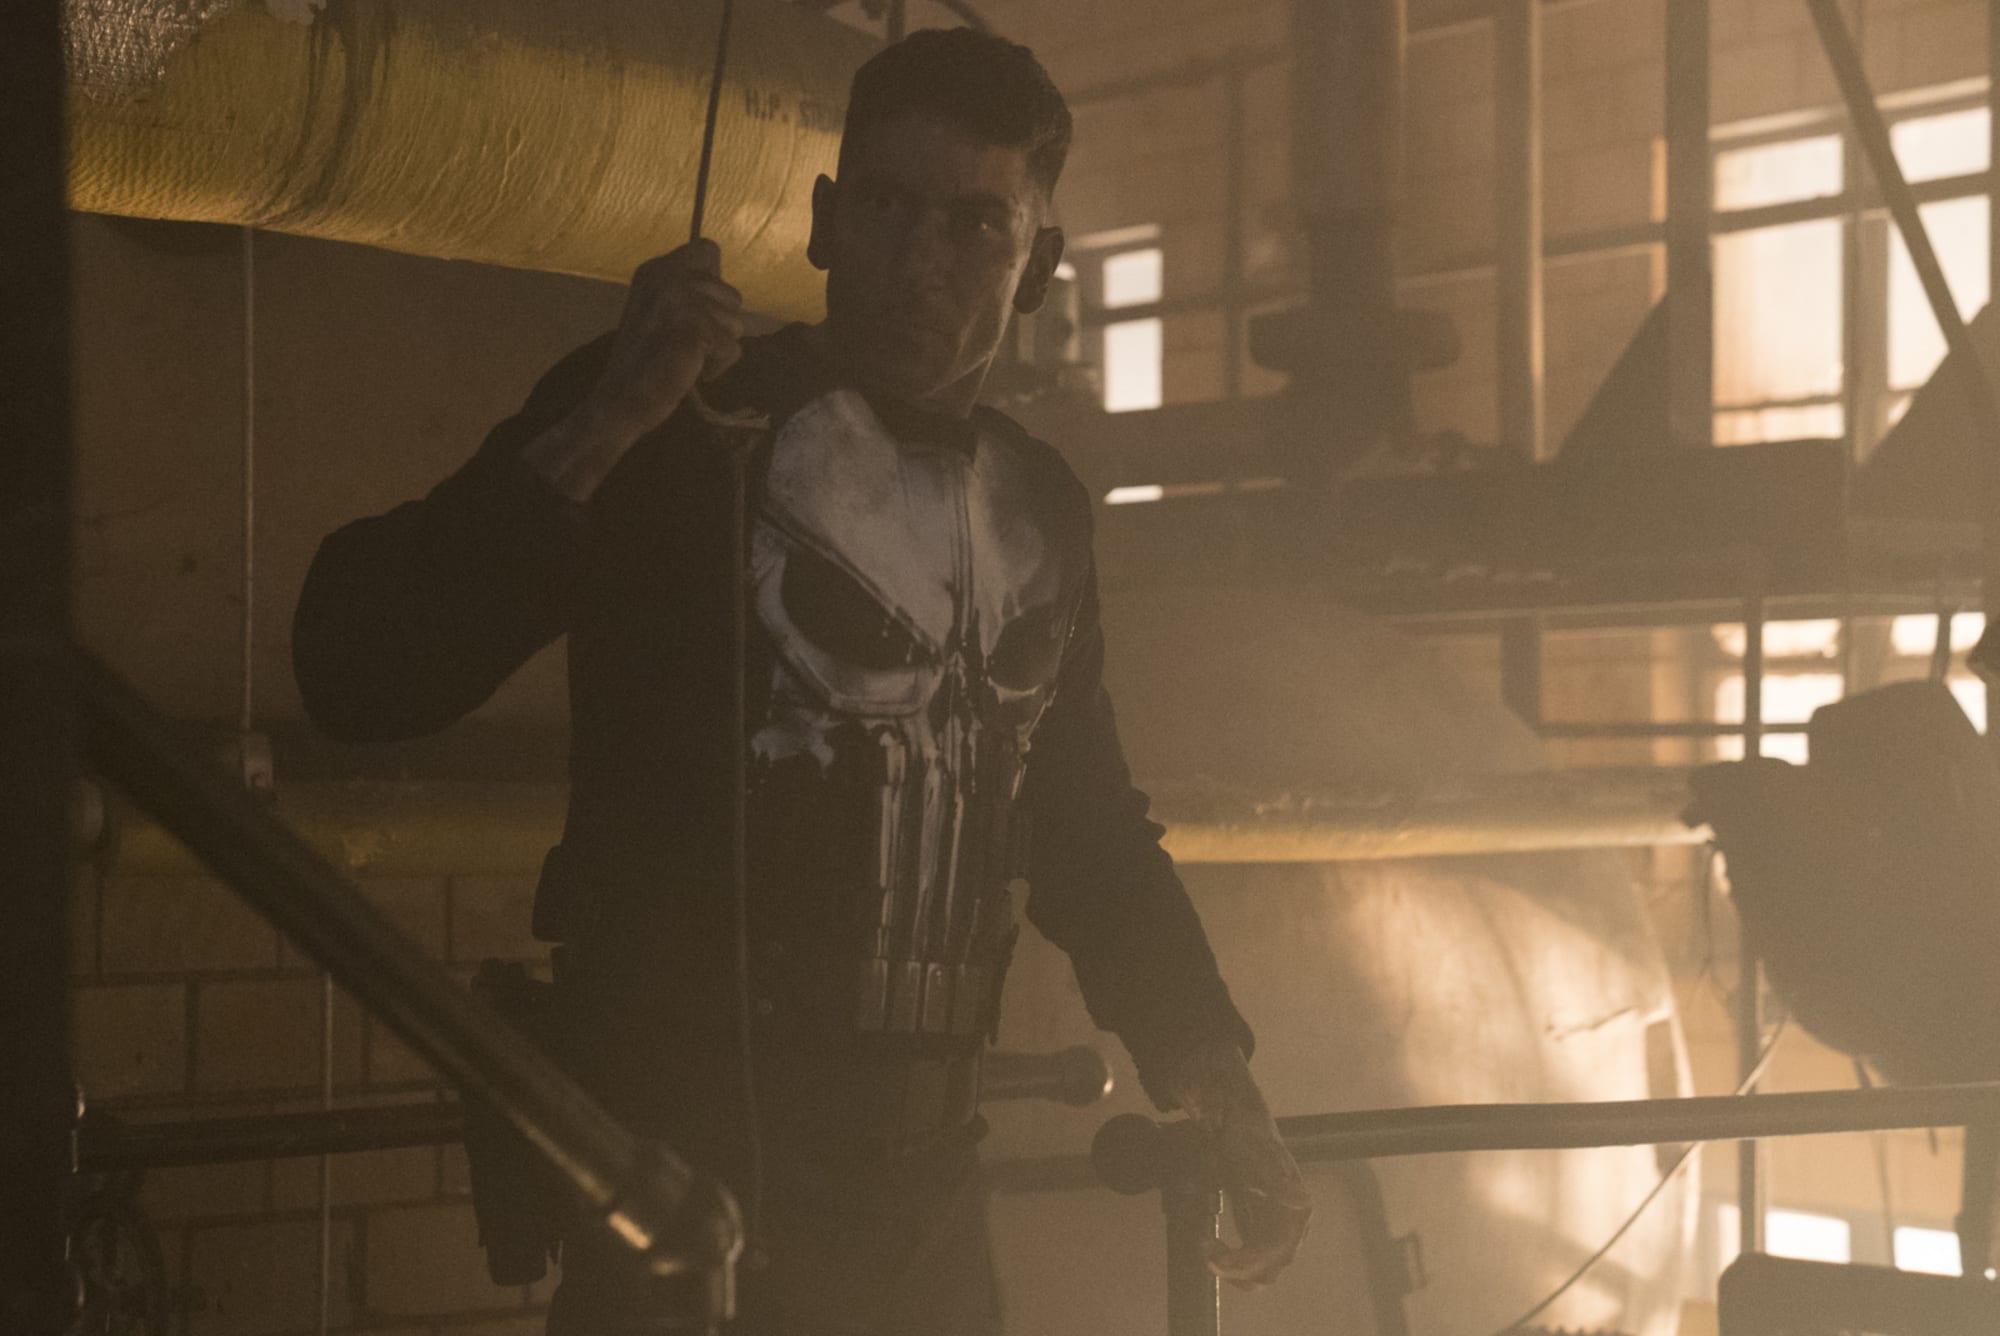 Marvel Comics: Ares turned Frank Castle into the
Punisher